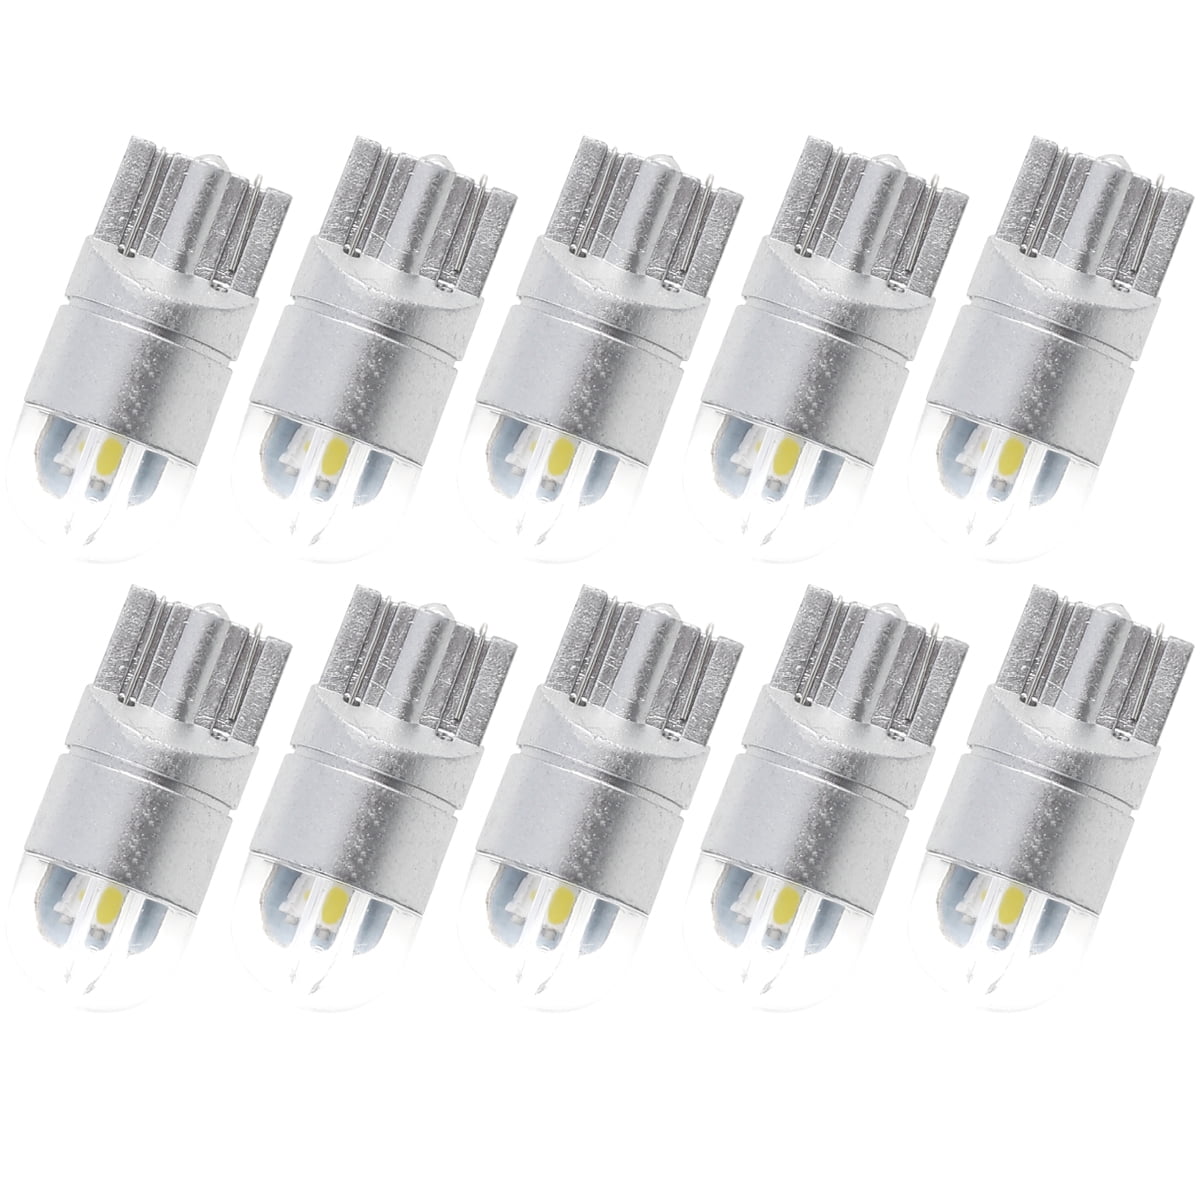 LED 501 T10 W5W Sidelight Interior Number Plate Bulbs x10